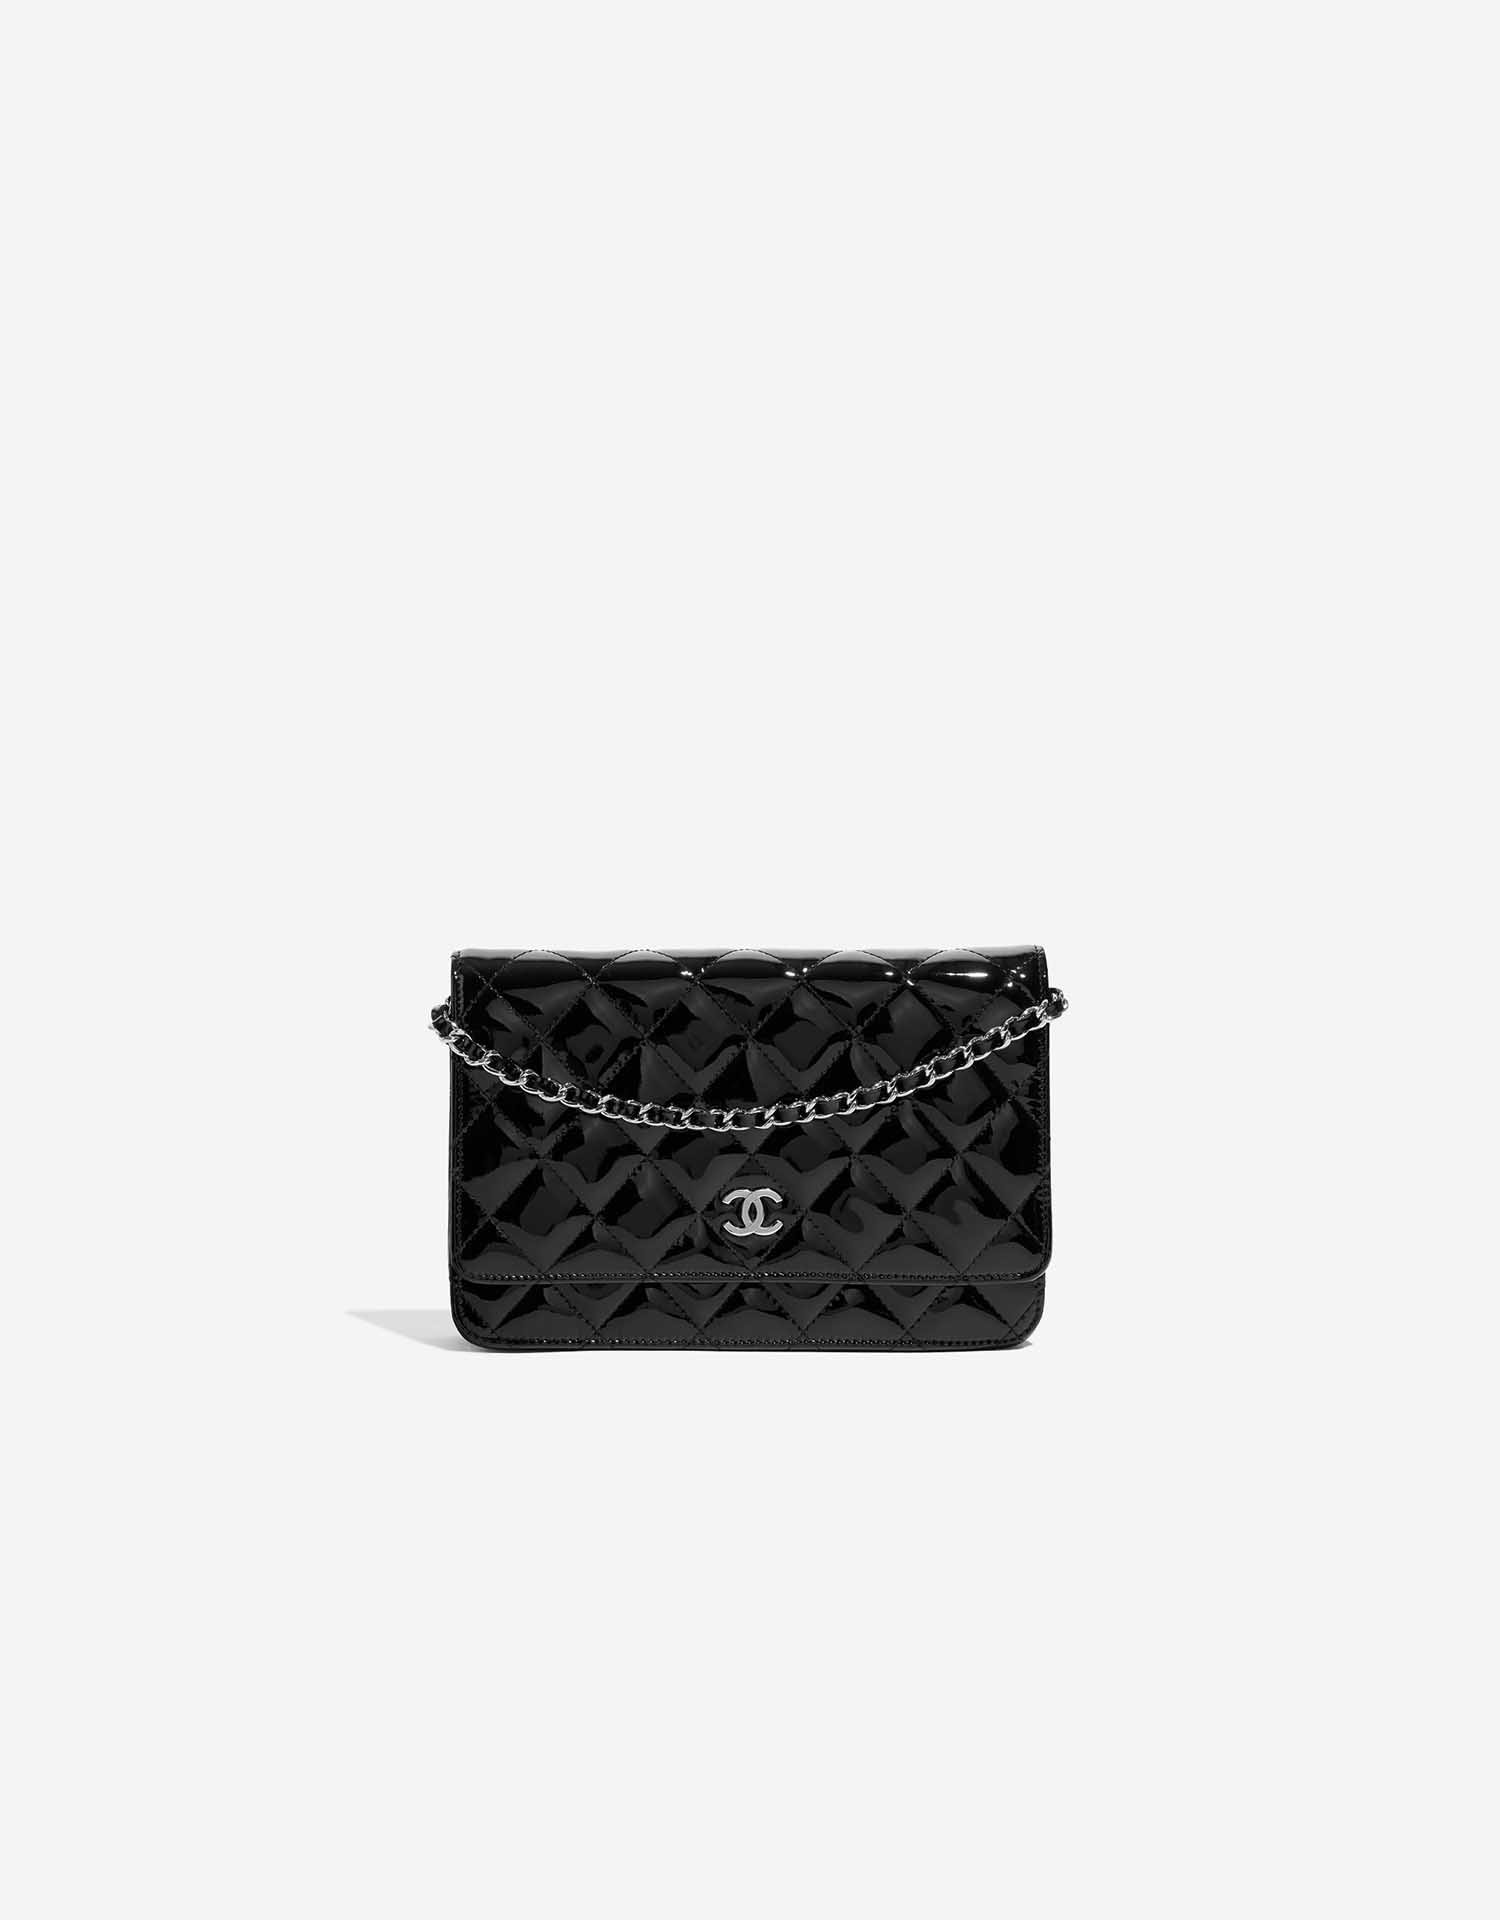 Chanel Timeless WOC Patent Leather Black